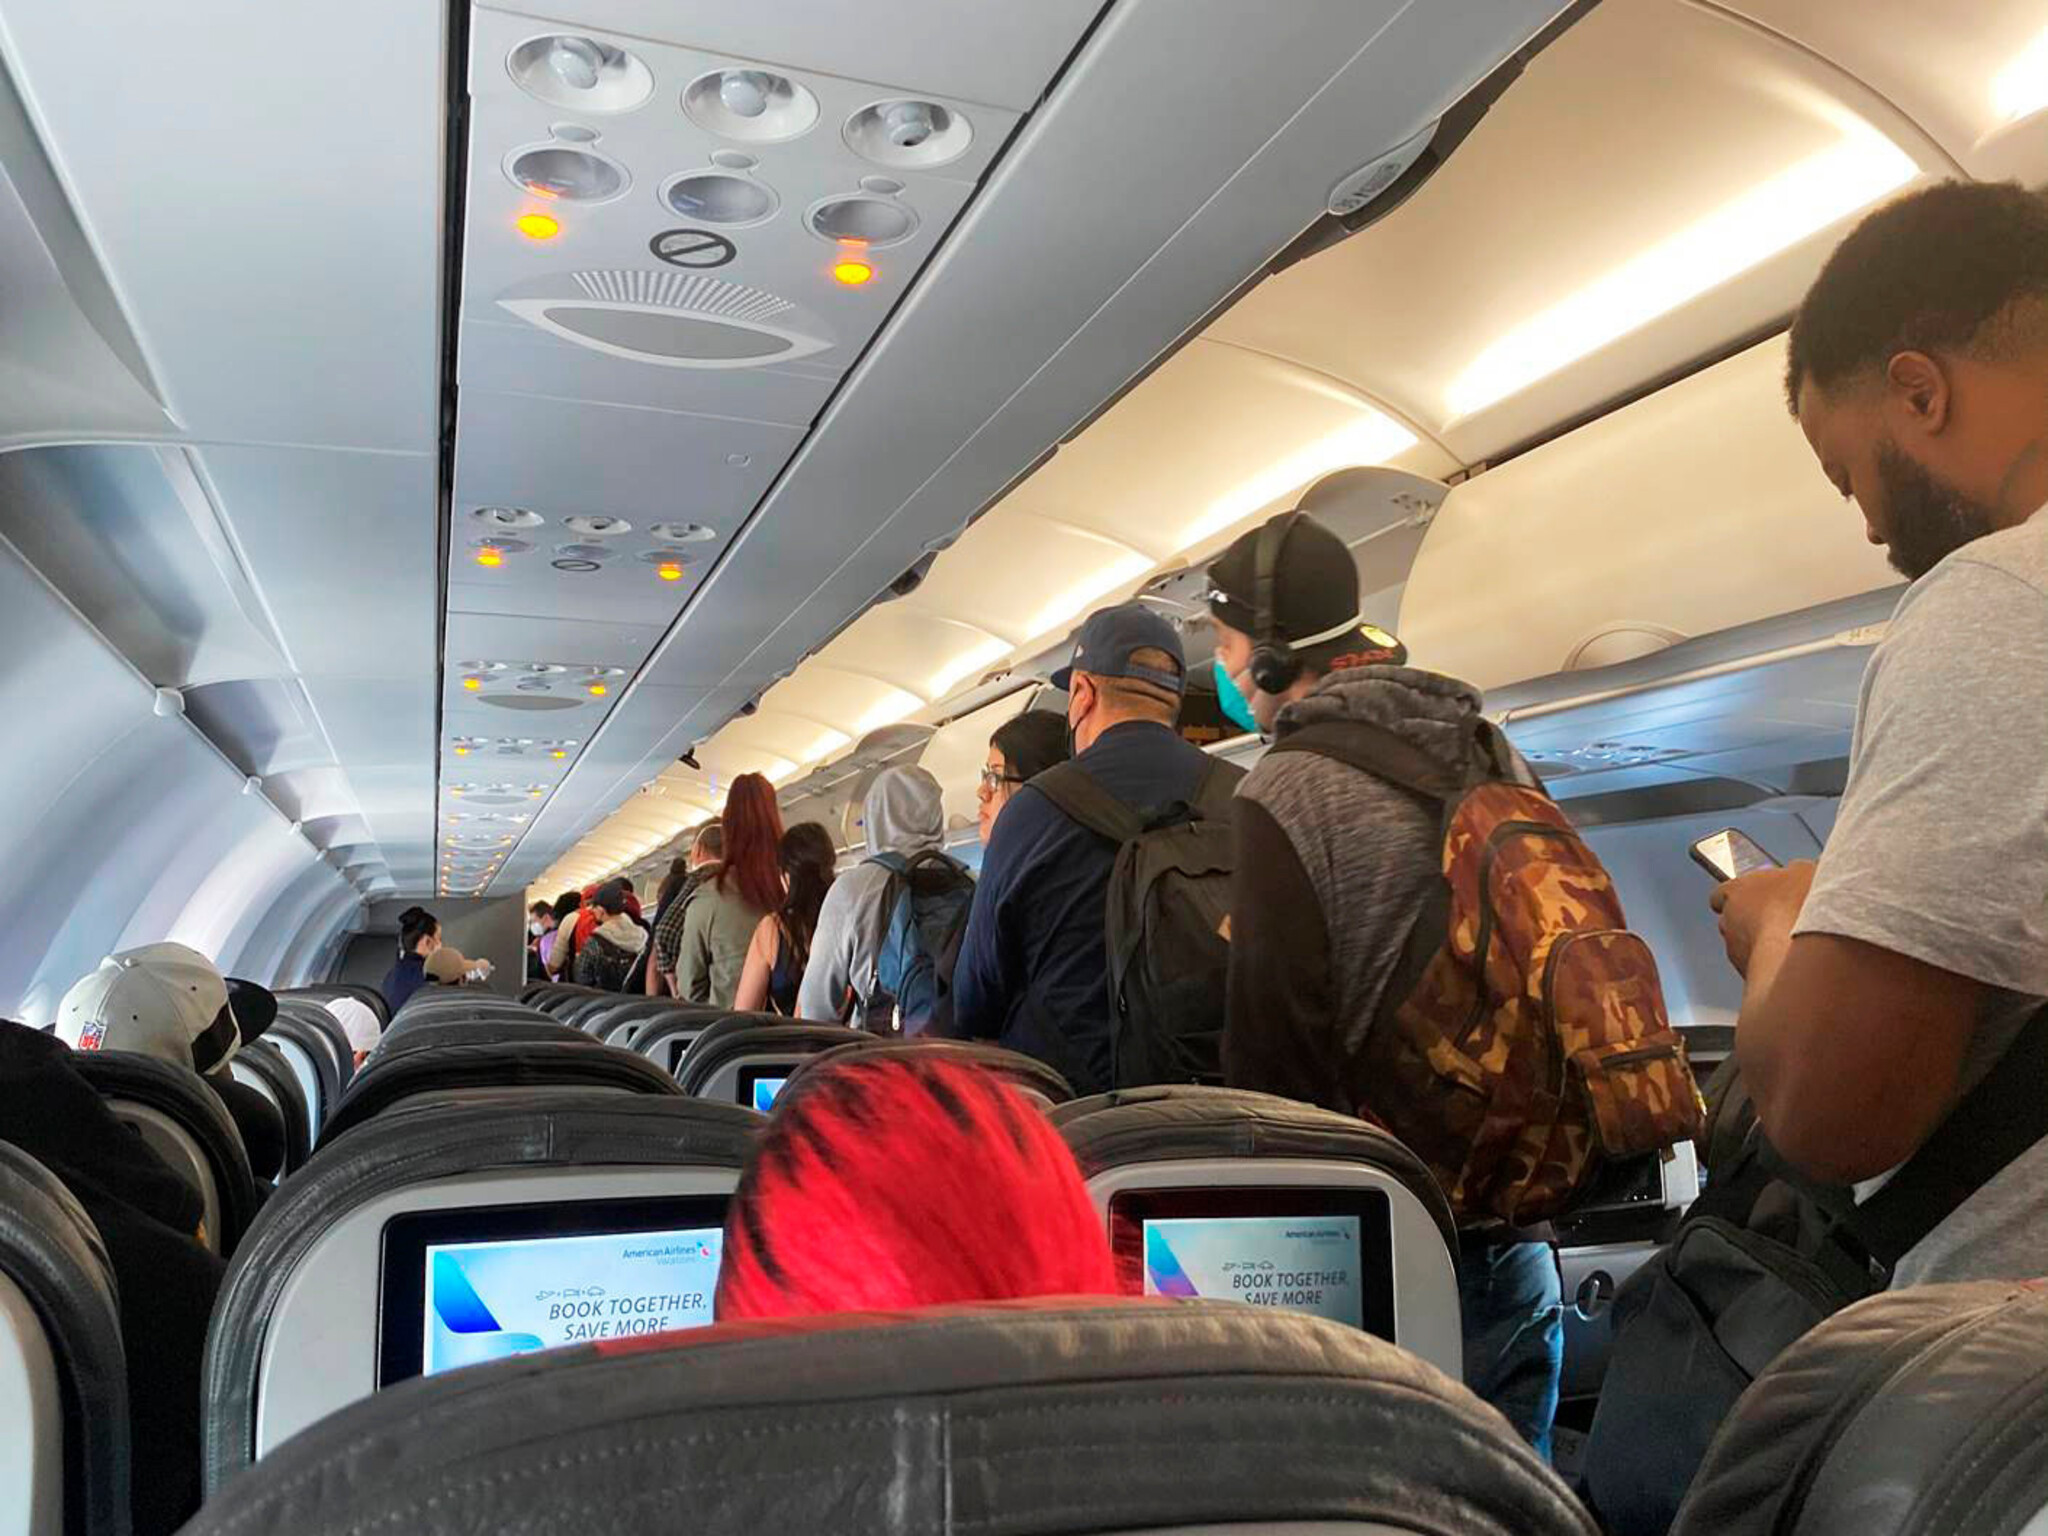 Travelers describe how passengers on the plane lose valuable items